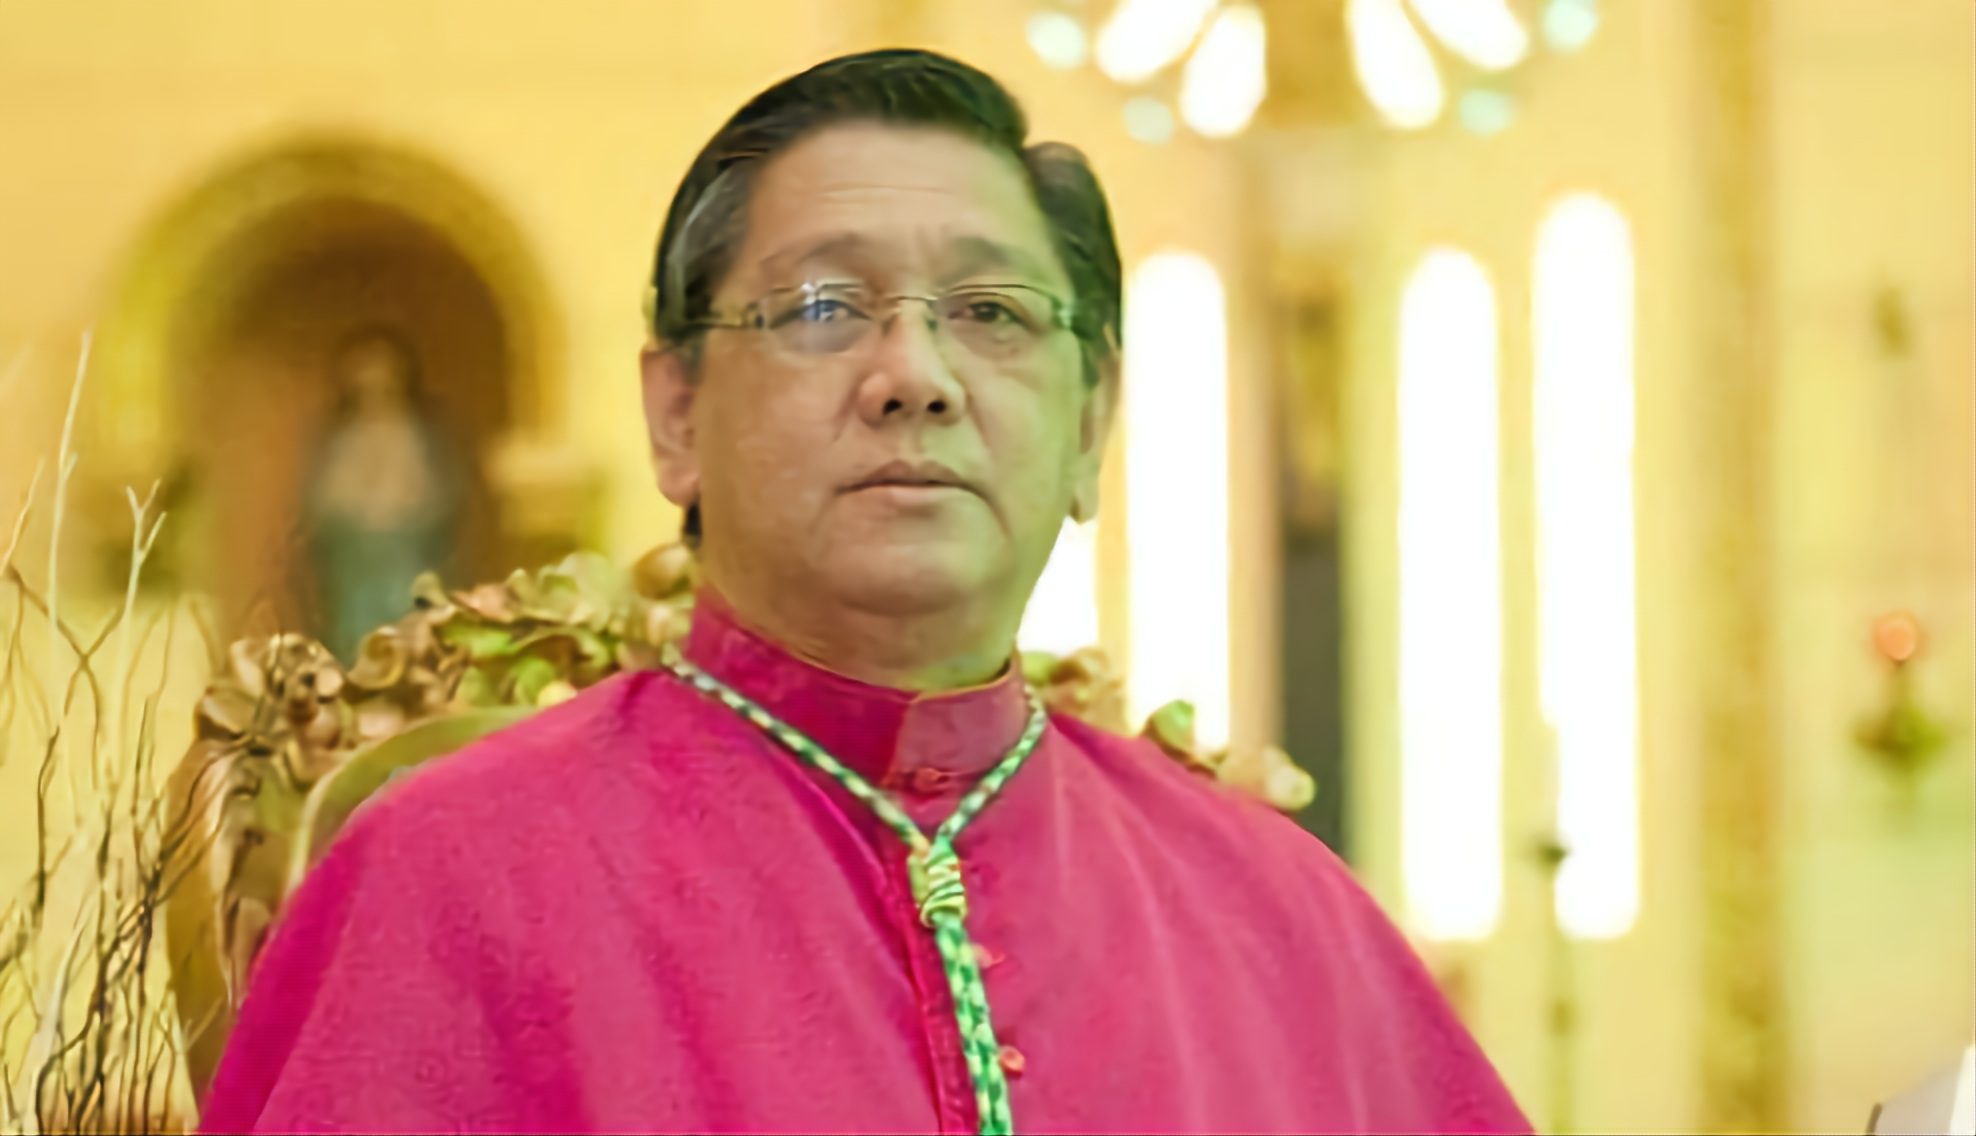 Bishop’s last-minute opposition casts shadow over Negros Island Region revival